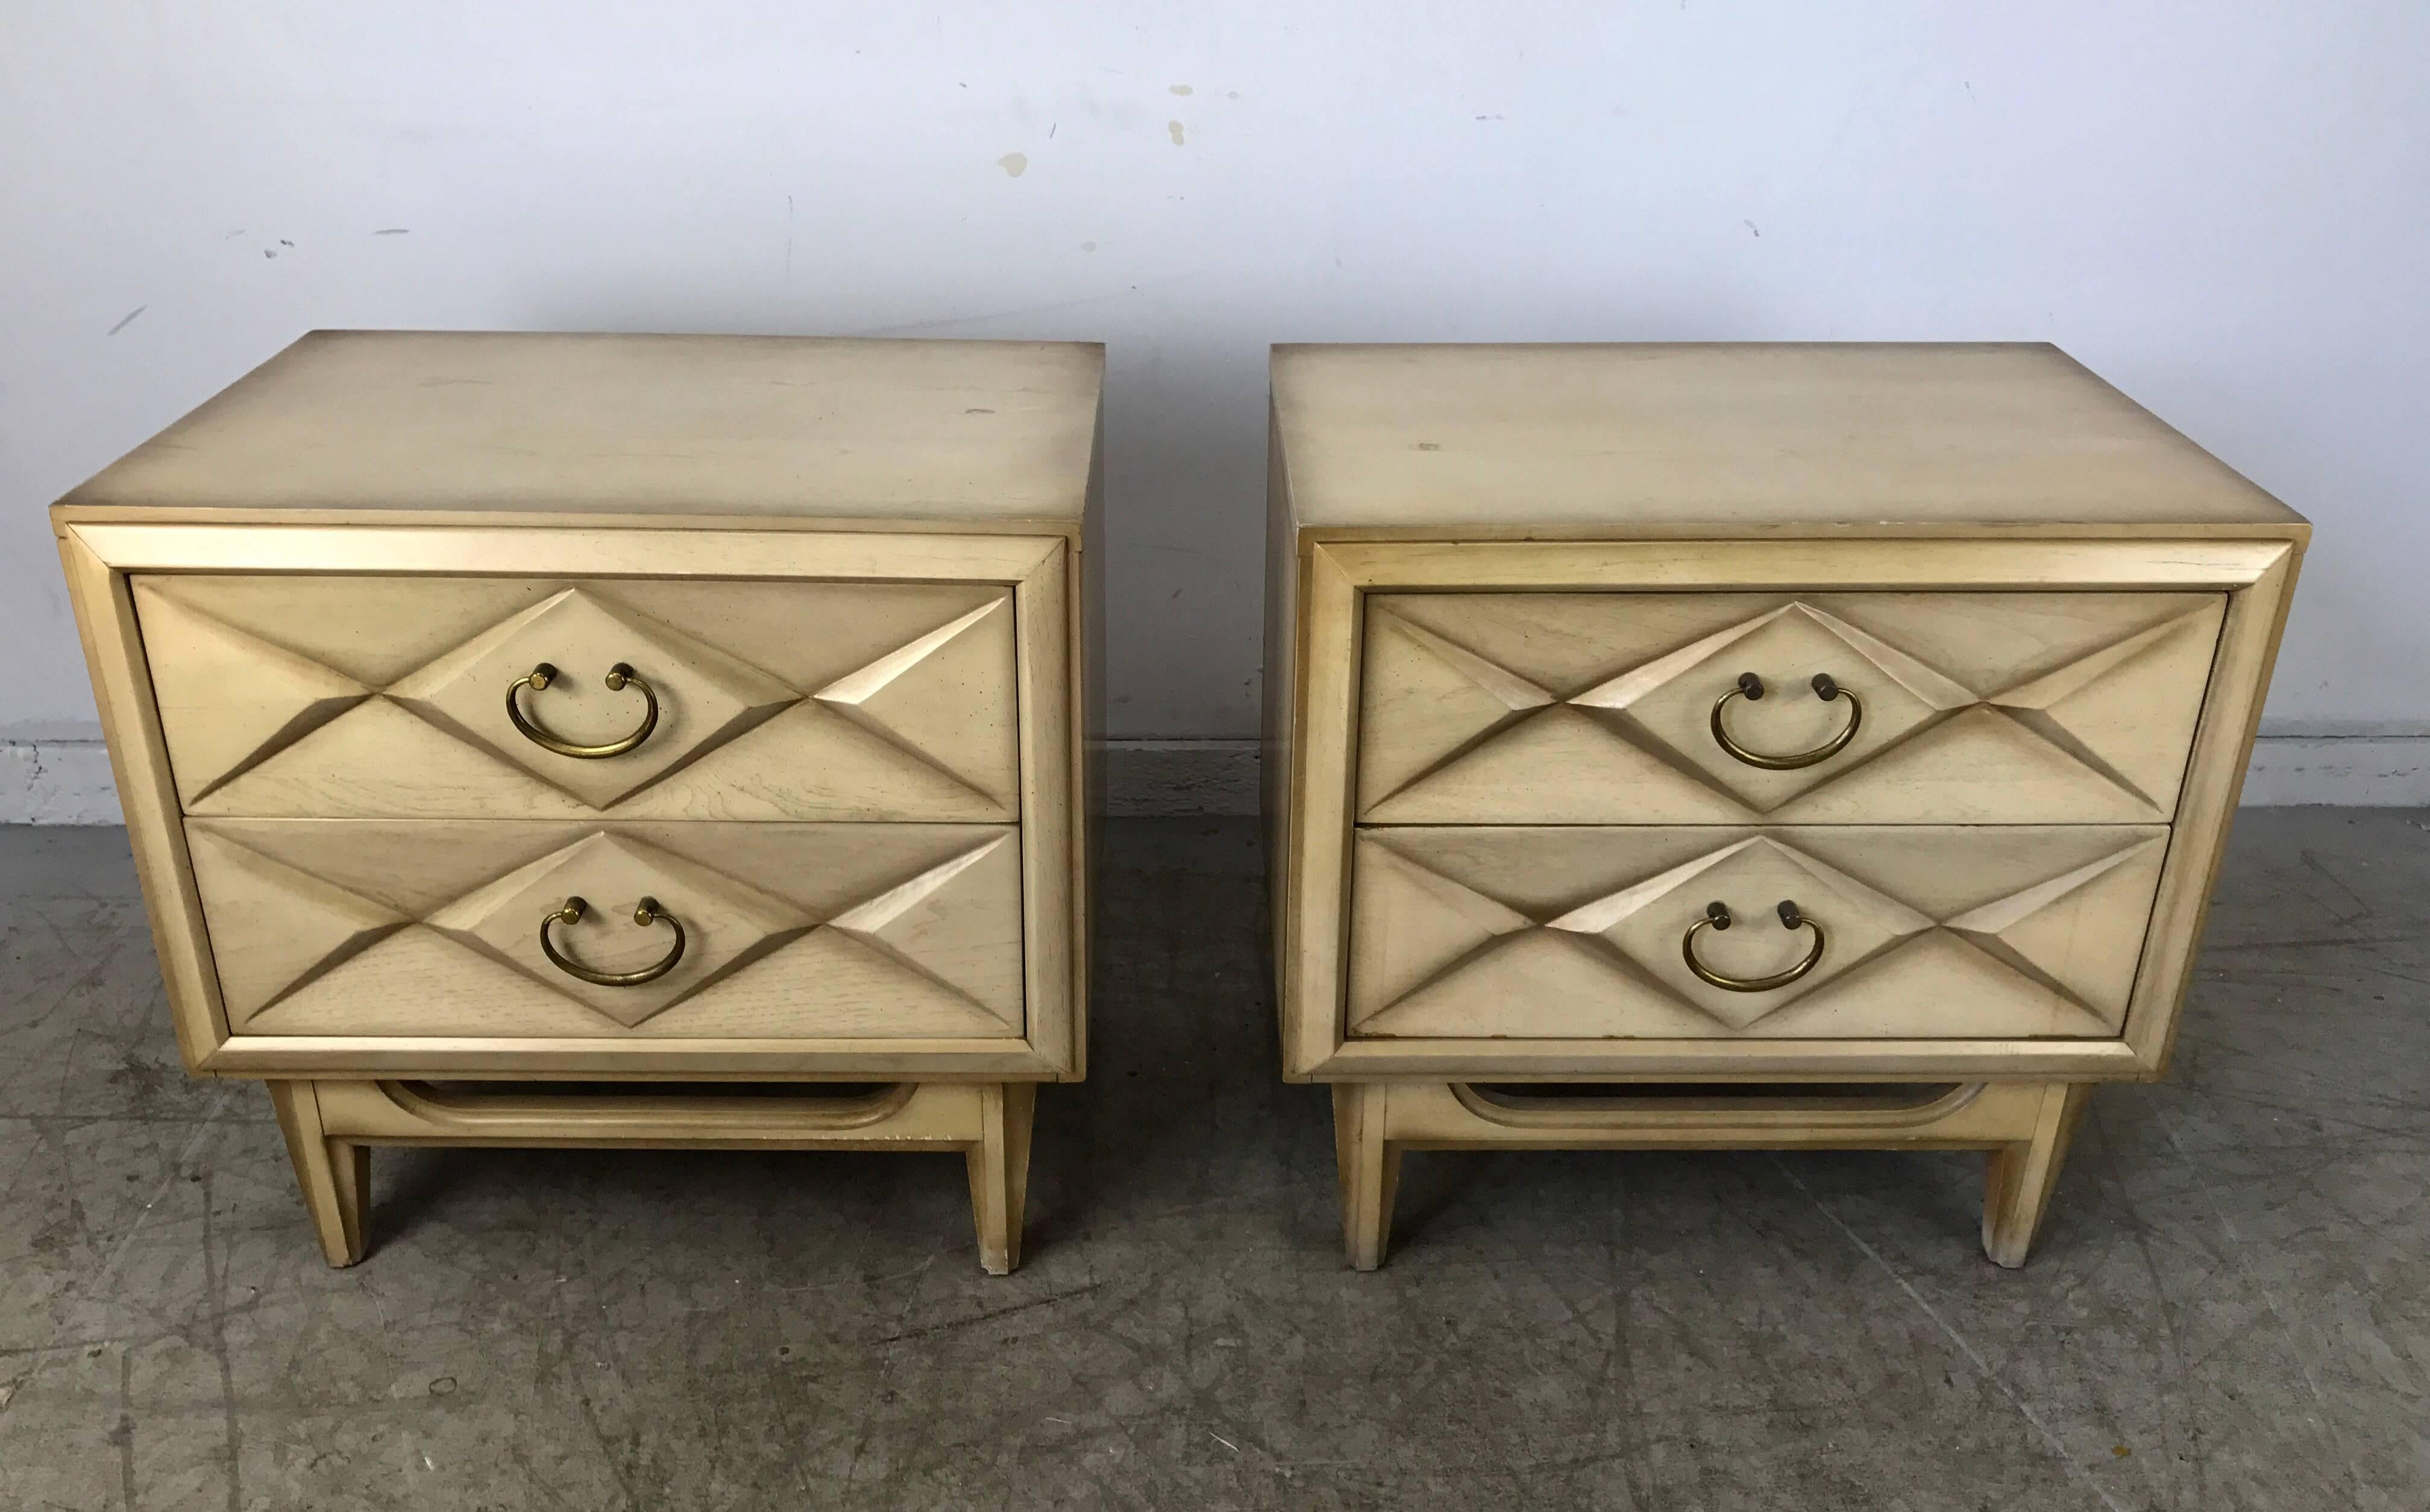 Classic pair of Regency two-drawer nightstands featuring two generous drawers, off-white lacquered wood with gold highlights and brass pulls. Superior quality and construction.